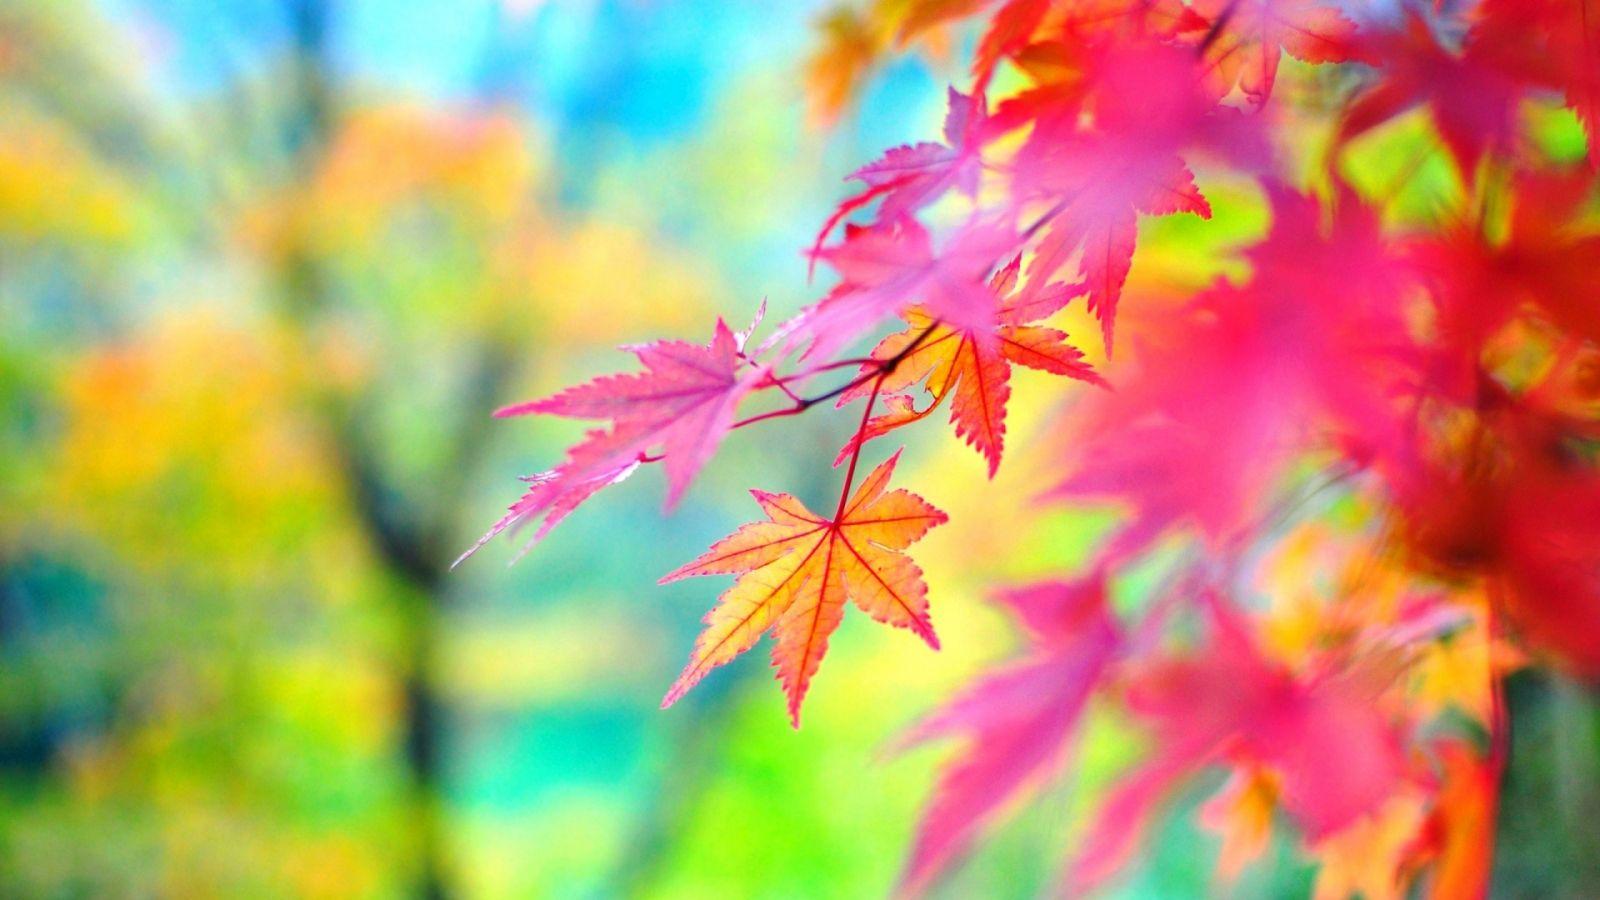 Colorful Wallpaper Photos, Download The BEST Free Colorful Wallpaper Stock  Photos & HD Images